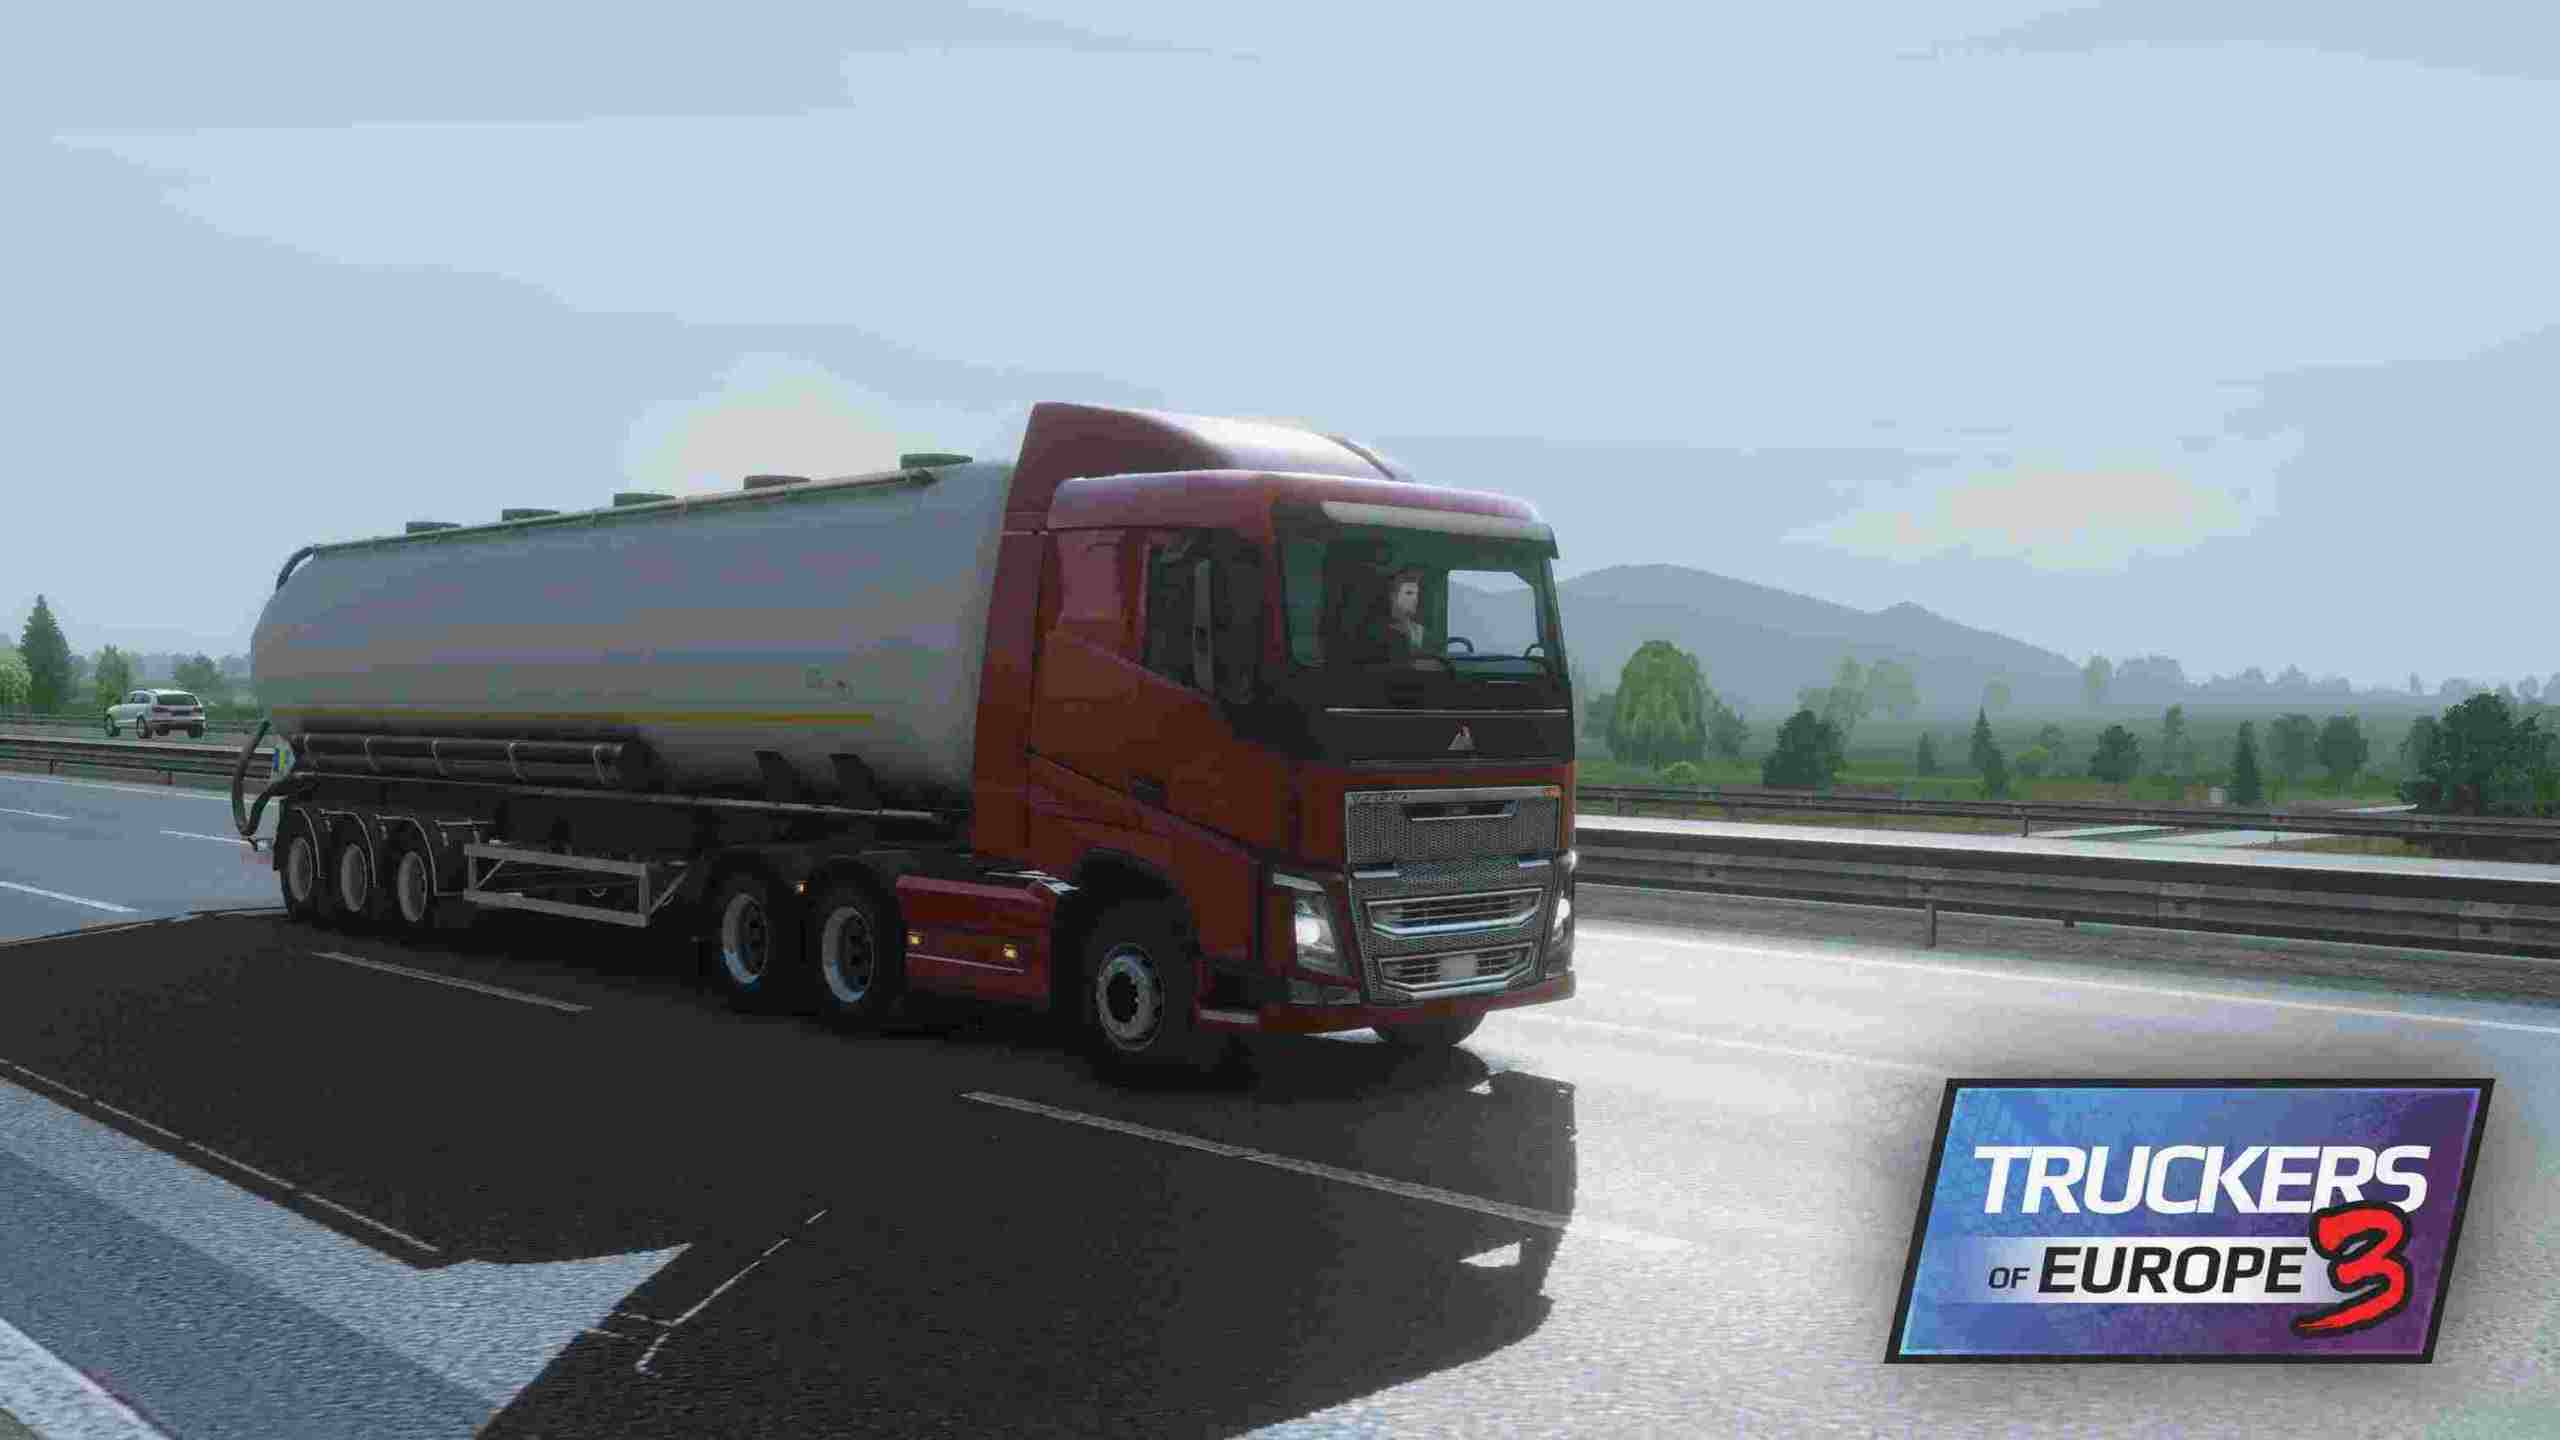 Truckers of Europe 3 0.45.2 APK MOD [Lượng Tiền Rất Lớn, Max Level, Skin, Sở Hữu Xe]